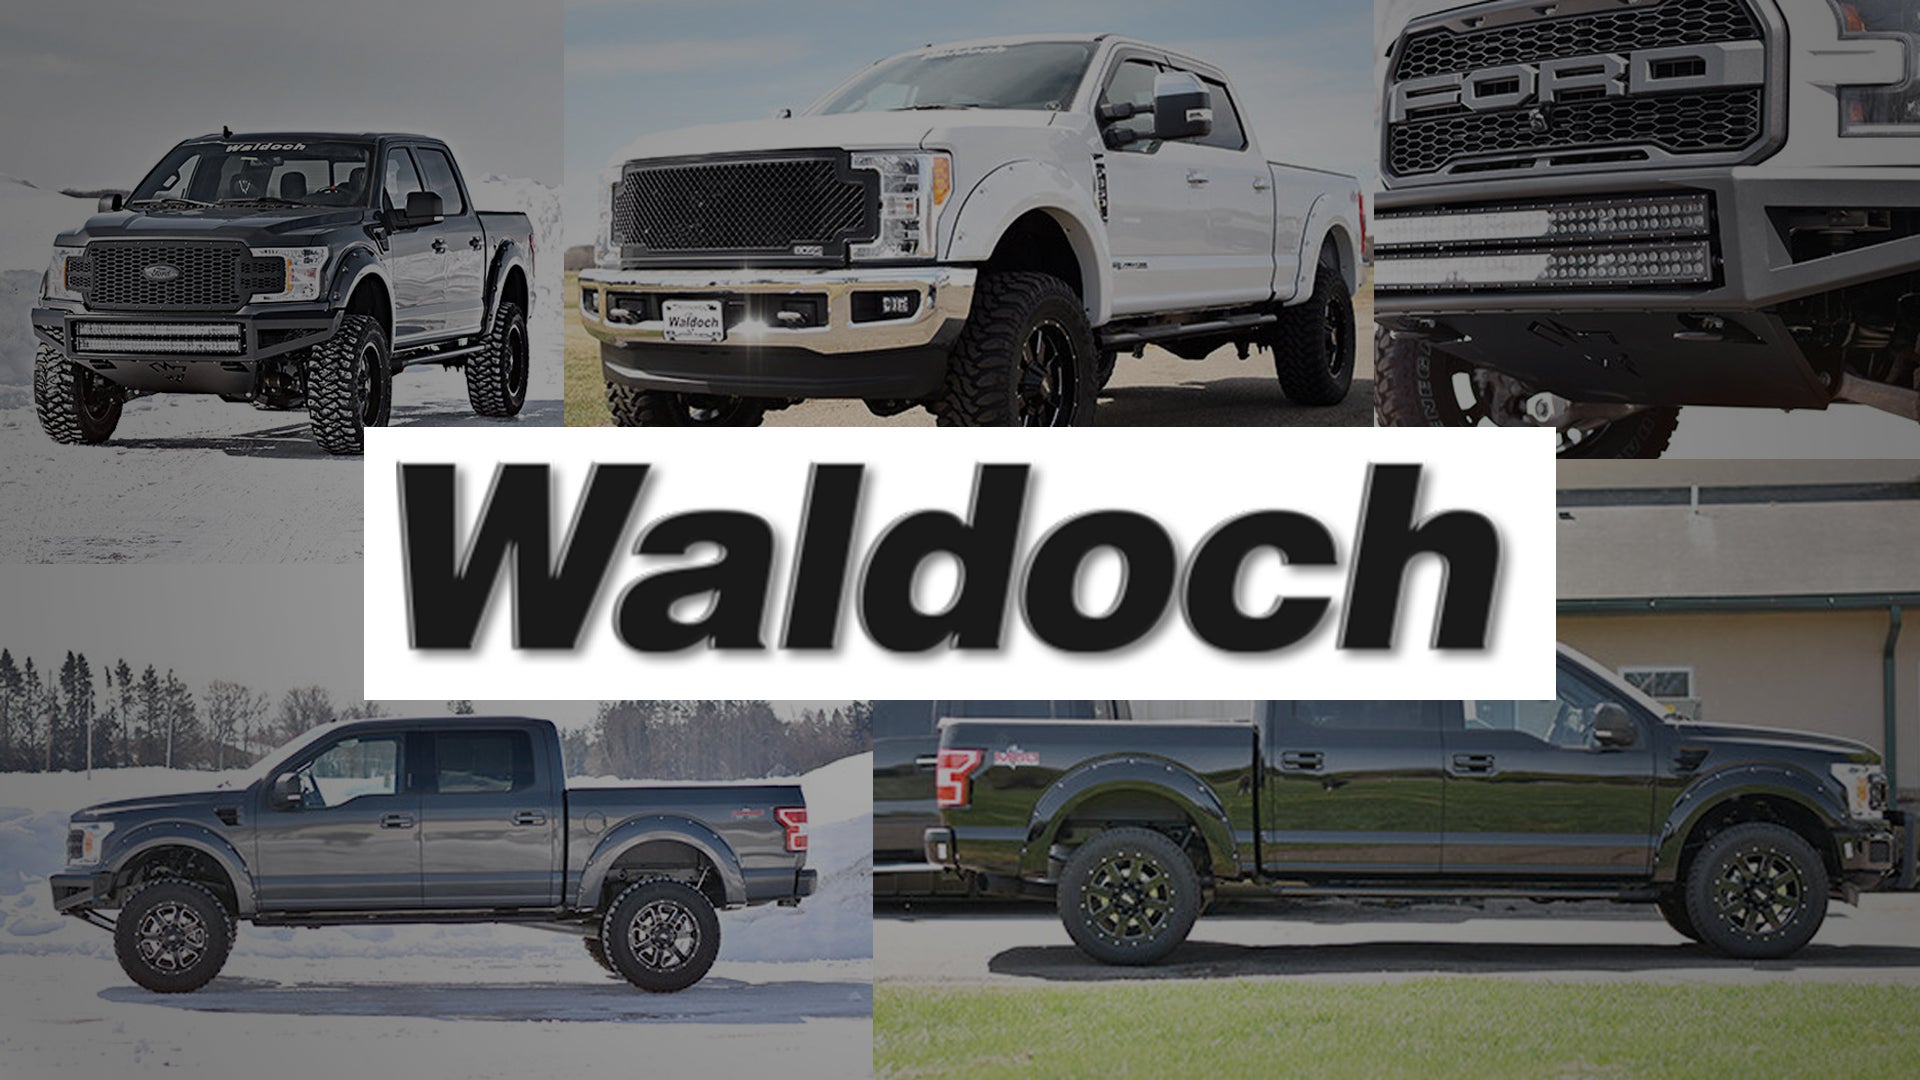 Waldoch Lifted Trucks at Benna Ford in Superior WI